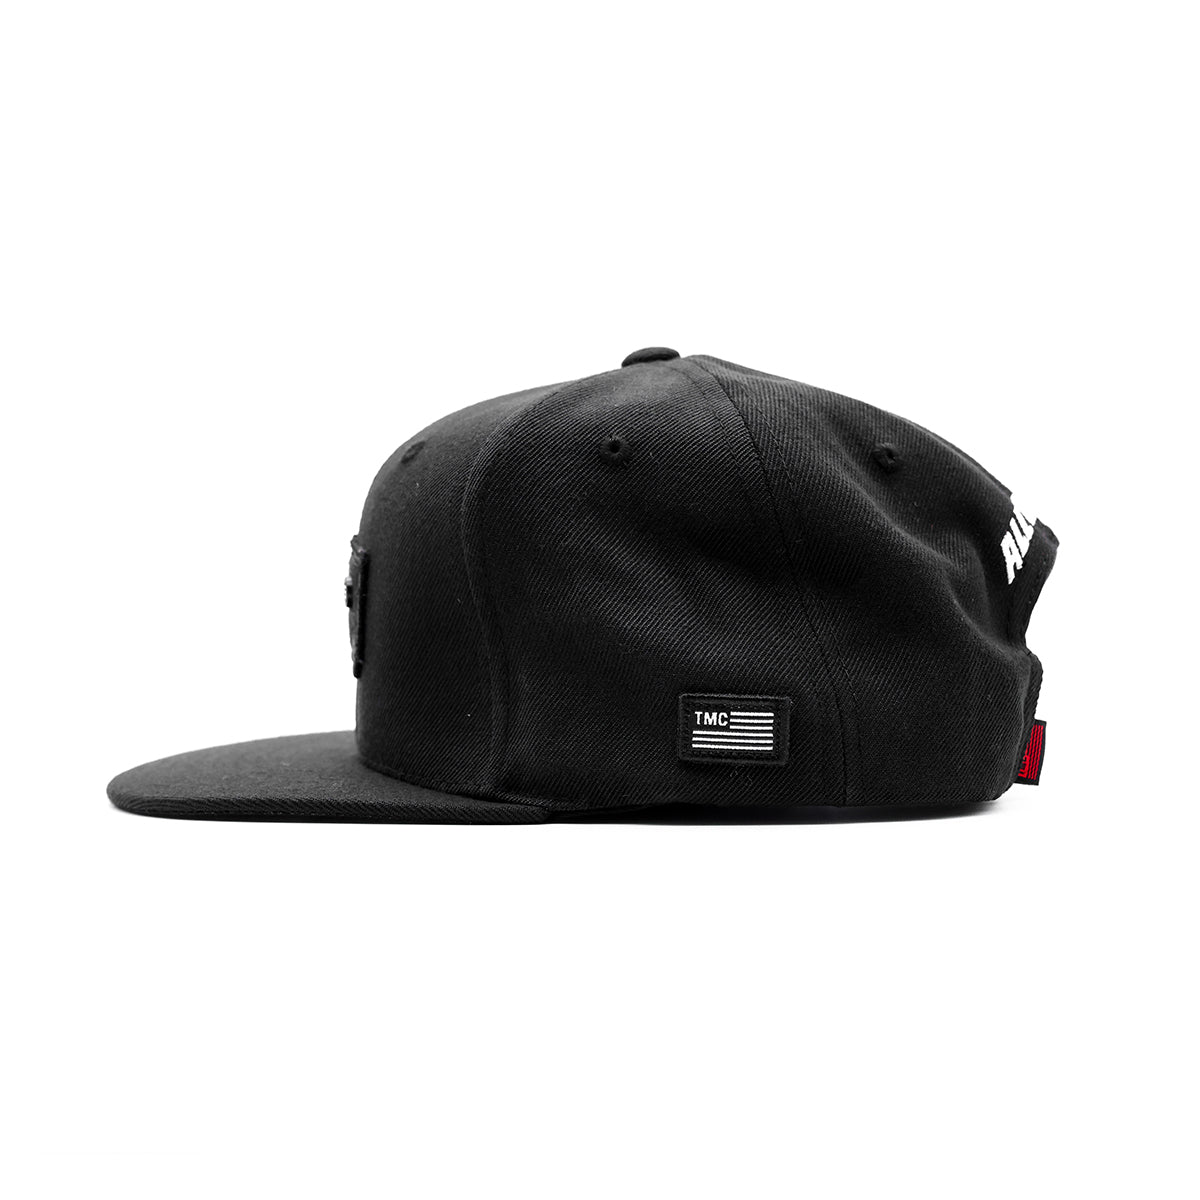 All Money In Armored Truck Limited Edition Snapback - Black/Black - Side